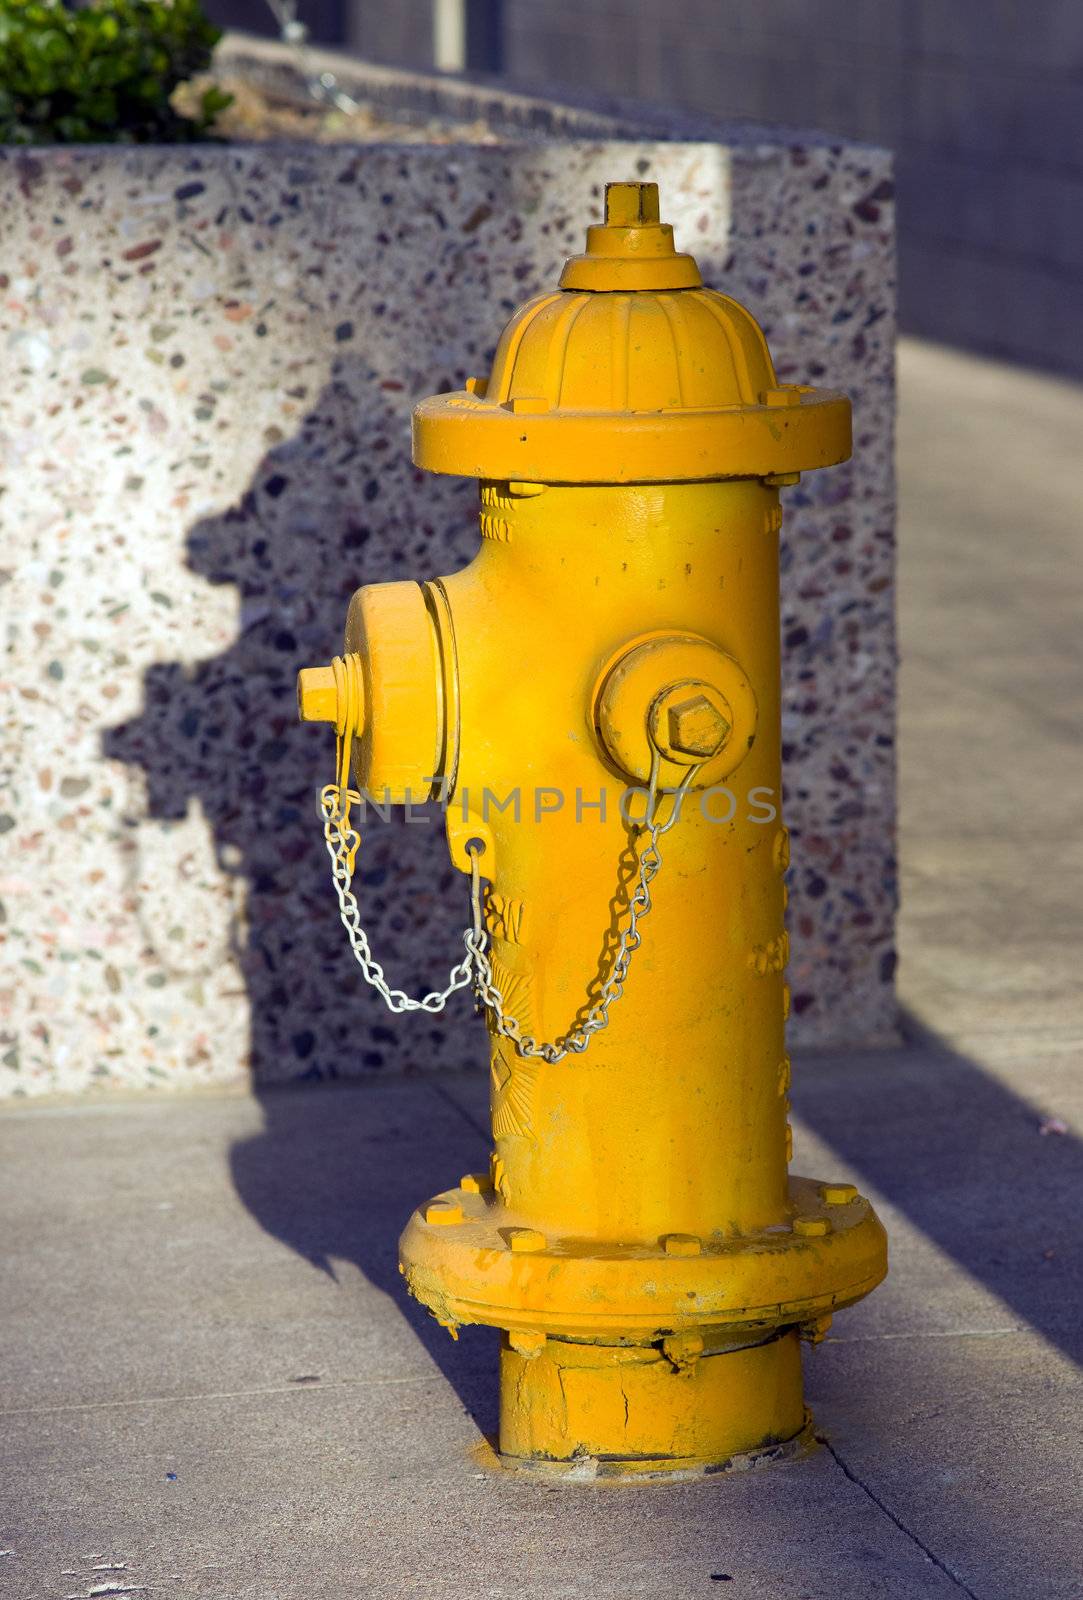 Fire Hydrant by ChrisBoswell